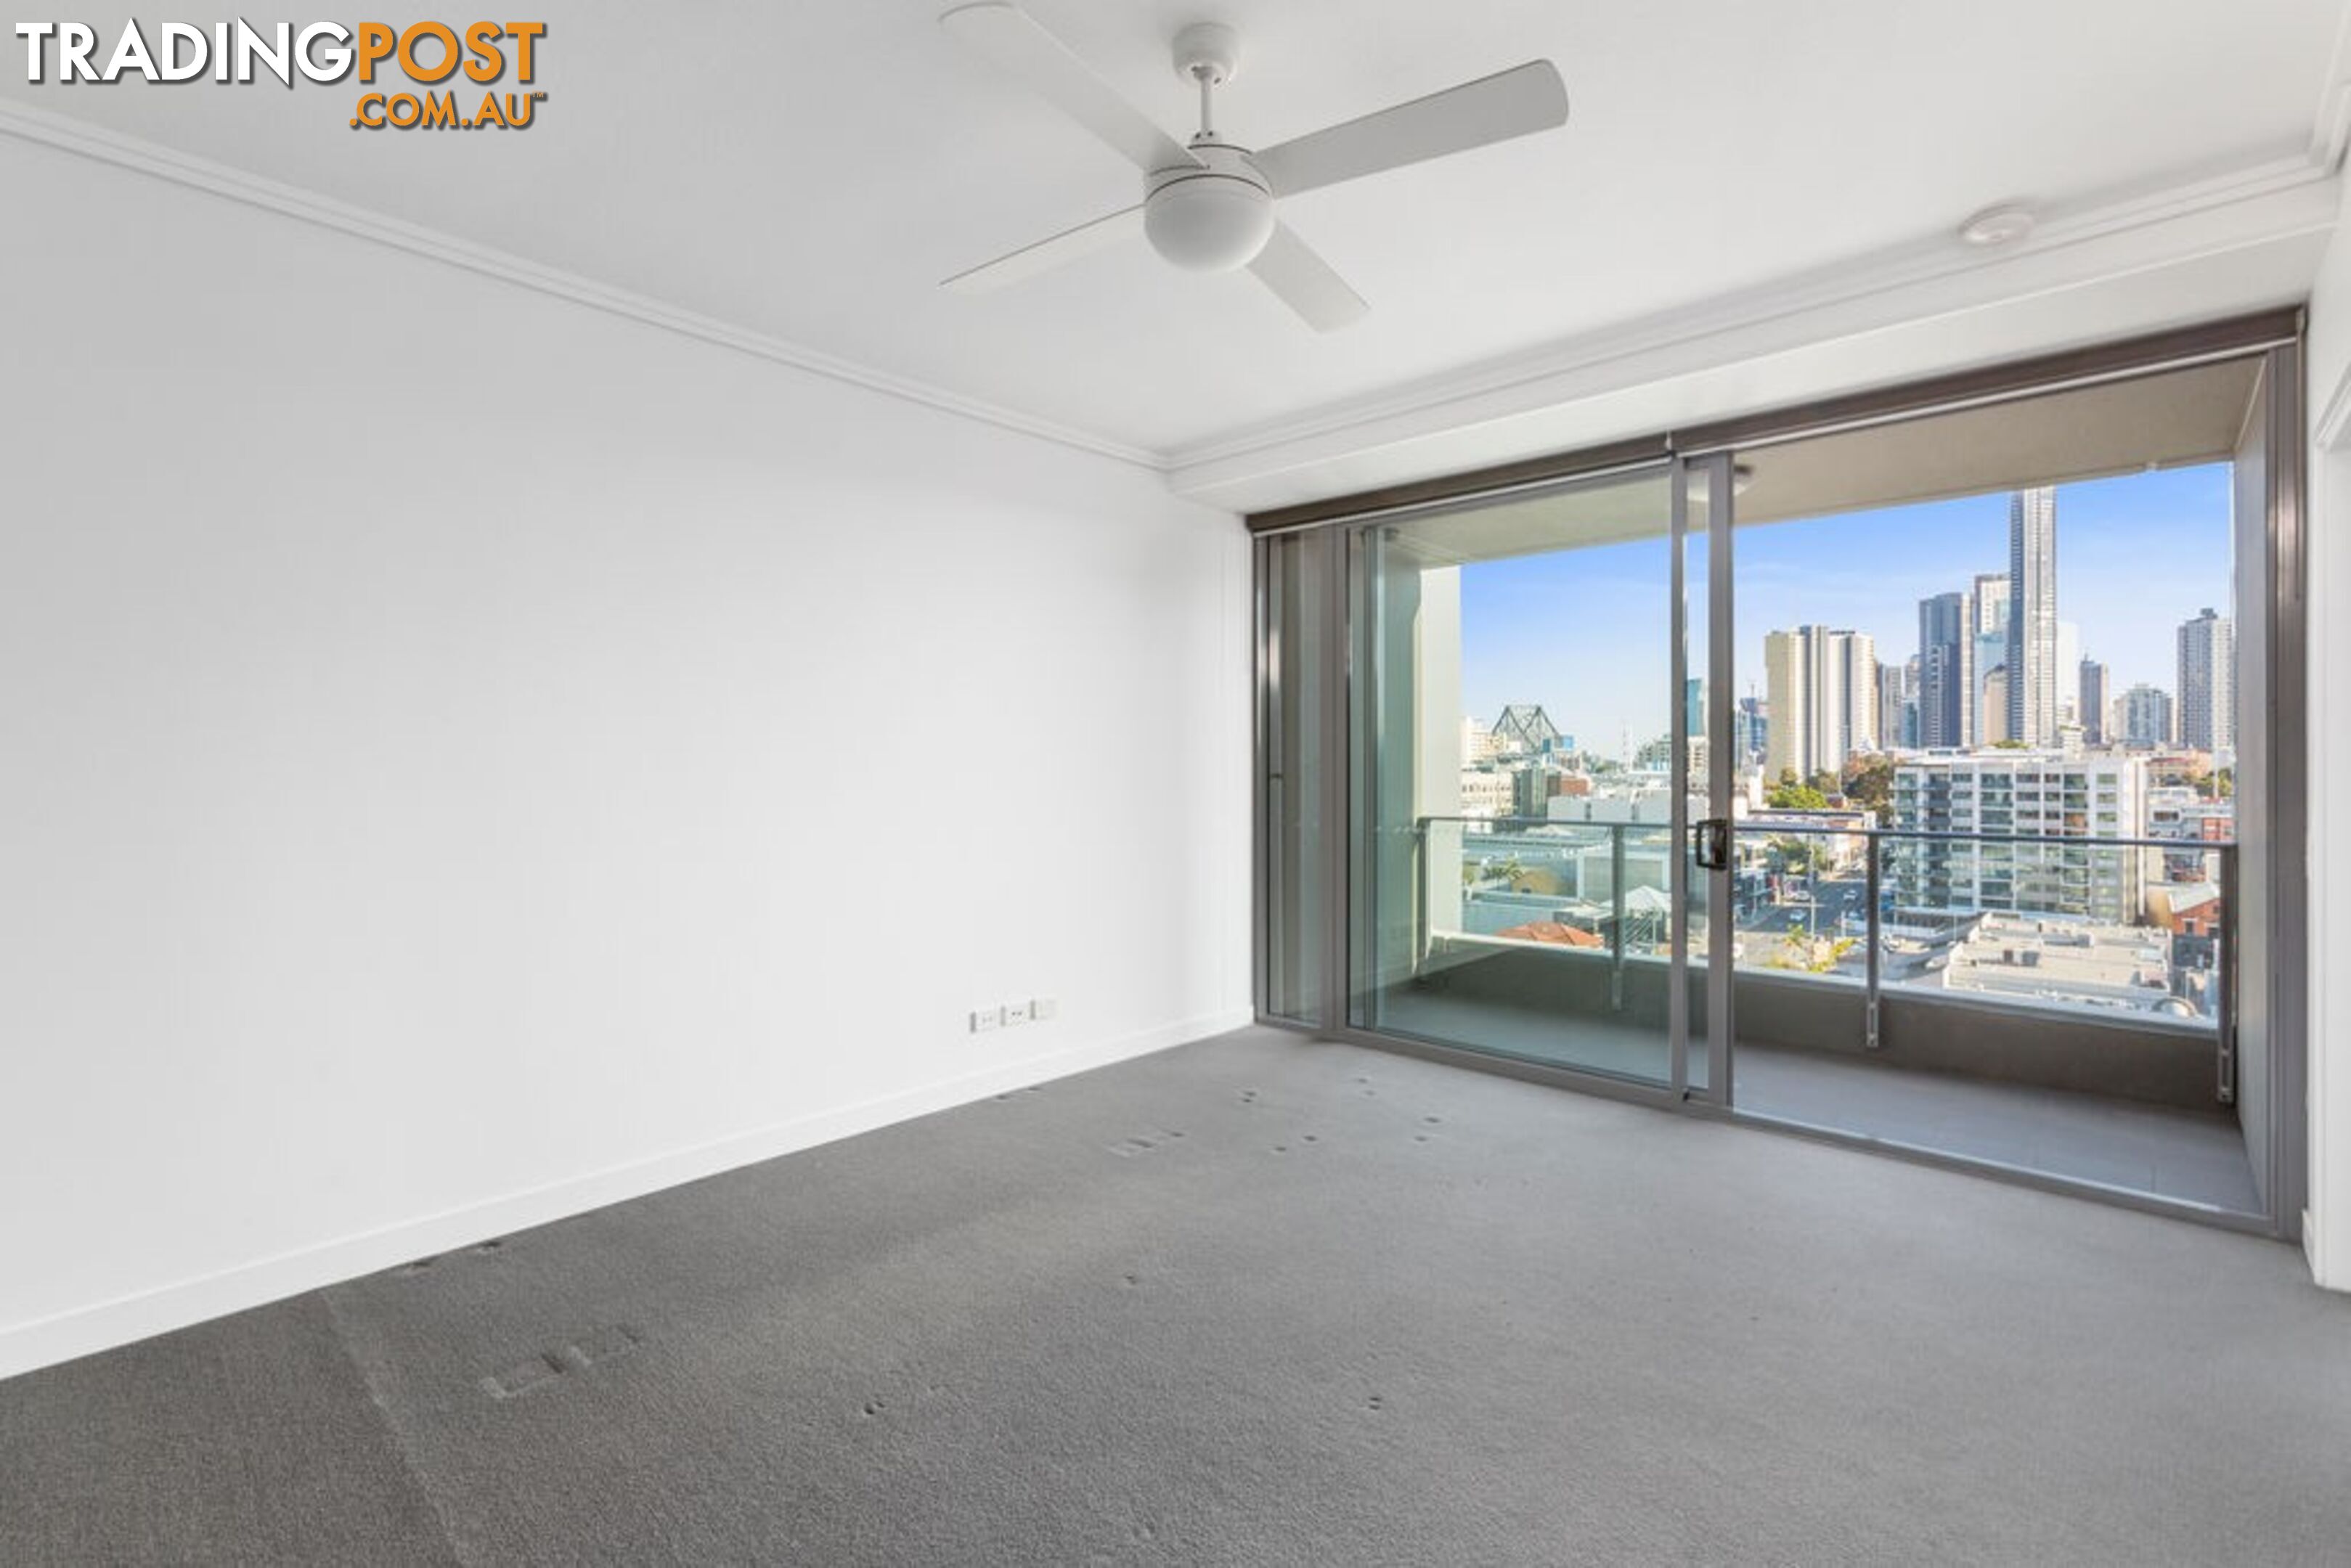 1202/25 Connor Street FORTITUDE VALLEY QLD 4006